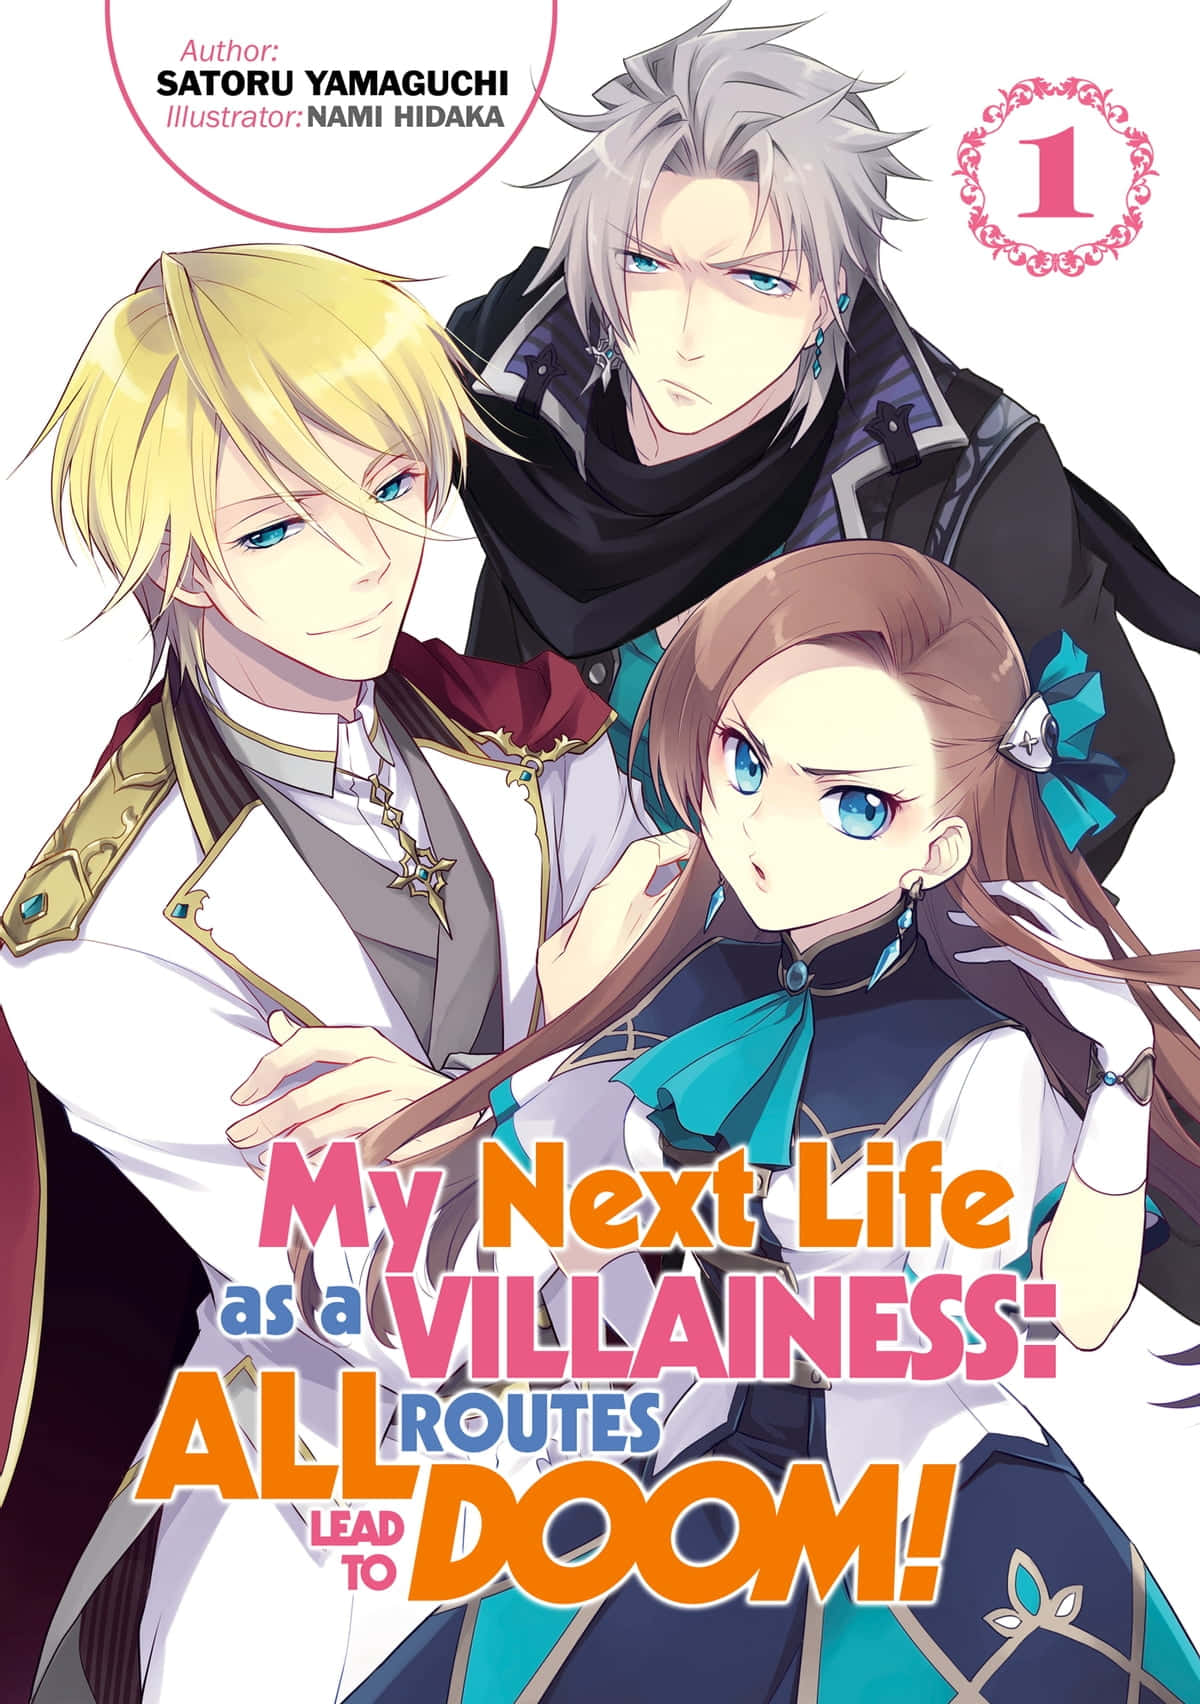 Enjoy an Epic Journey of Love and Adventure in My Next Life As A Villainess All Routes Lead To Doom! Wallpaper